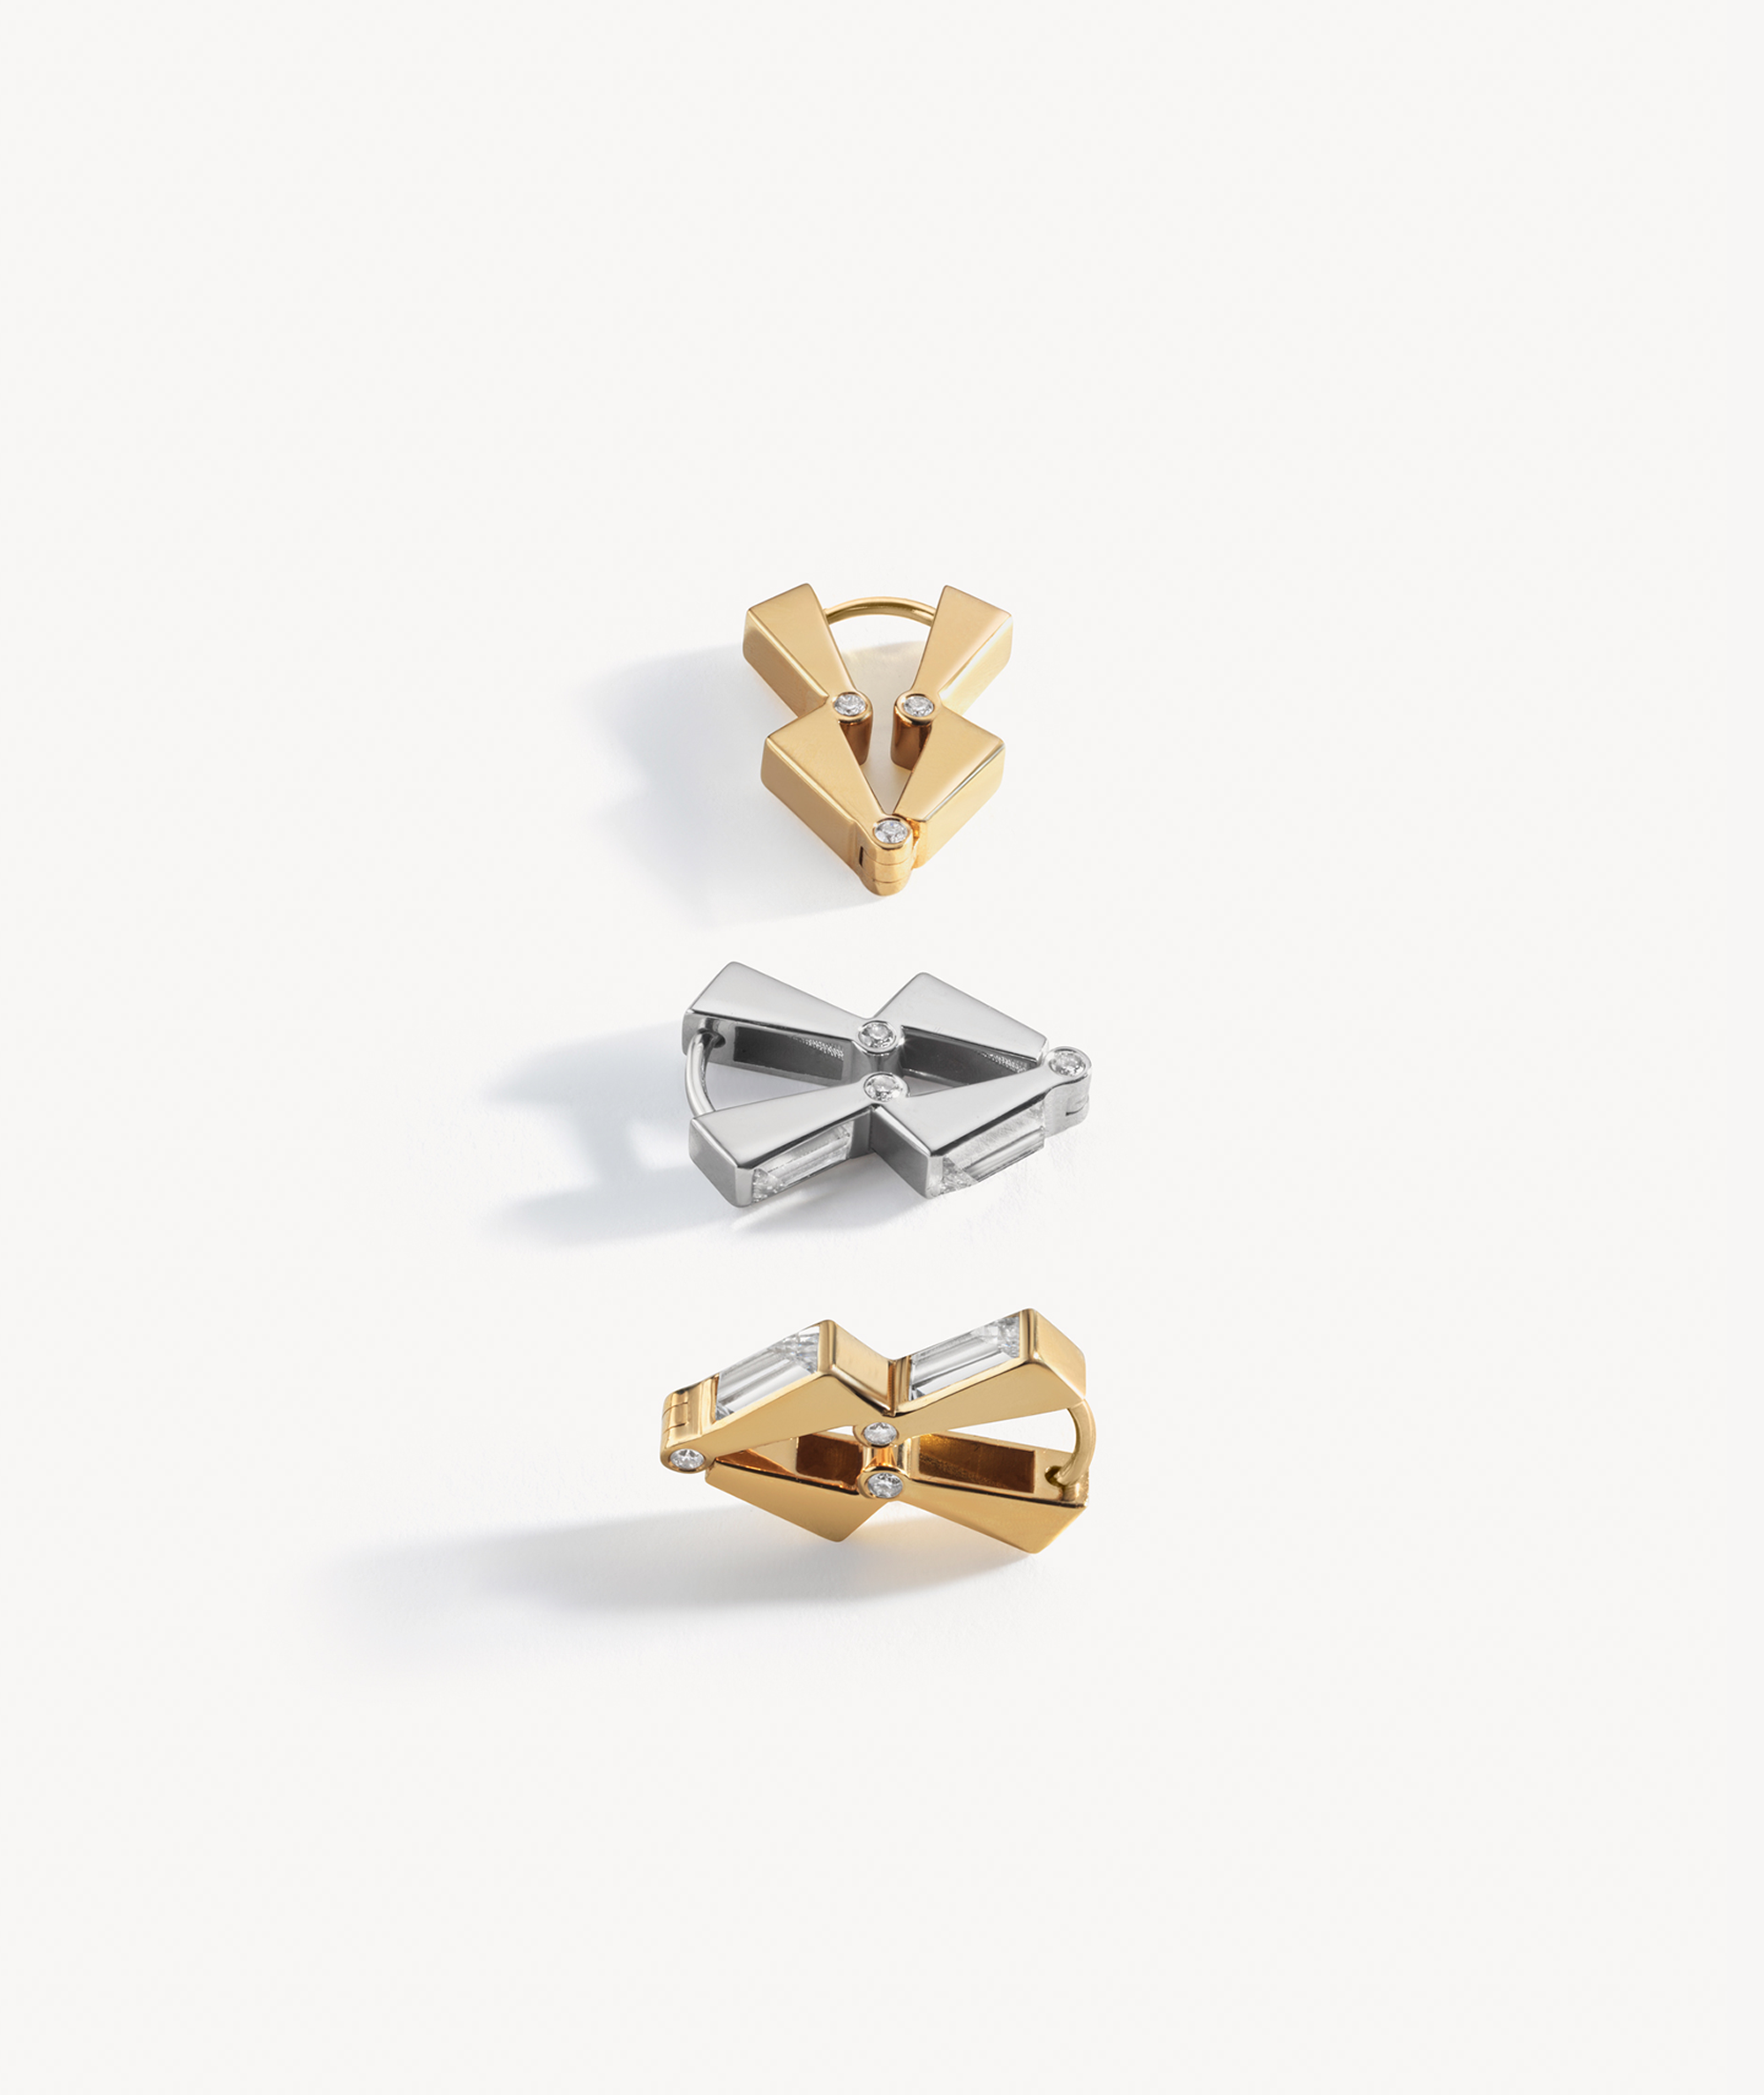 EREDE earrings in 18k recycled yellow and white gold and lab-grown diamonds.